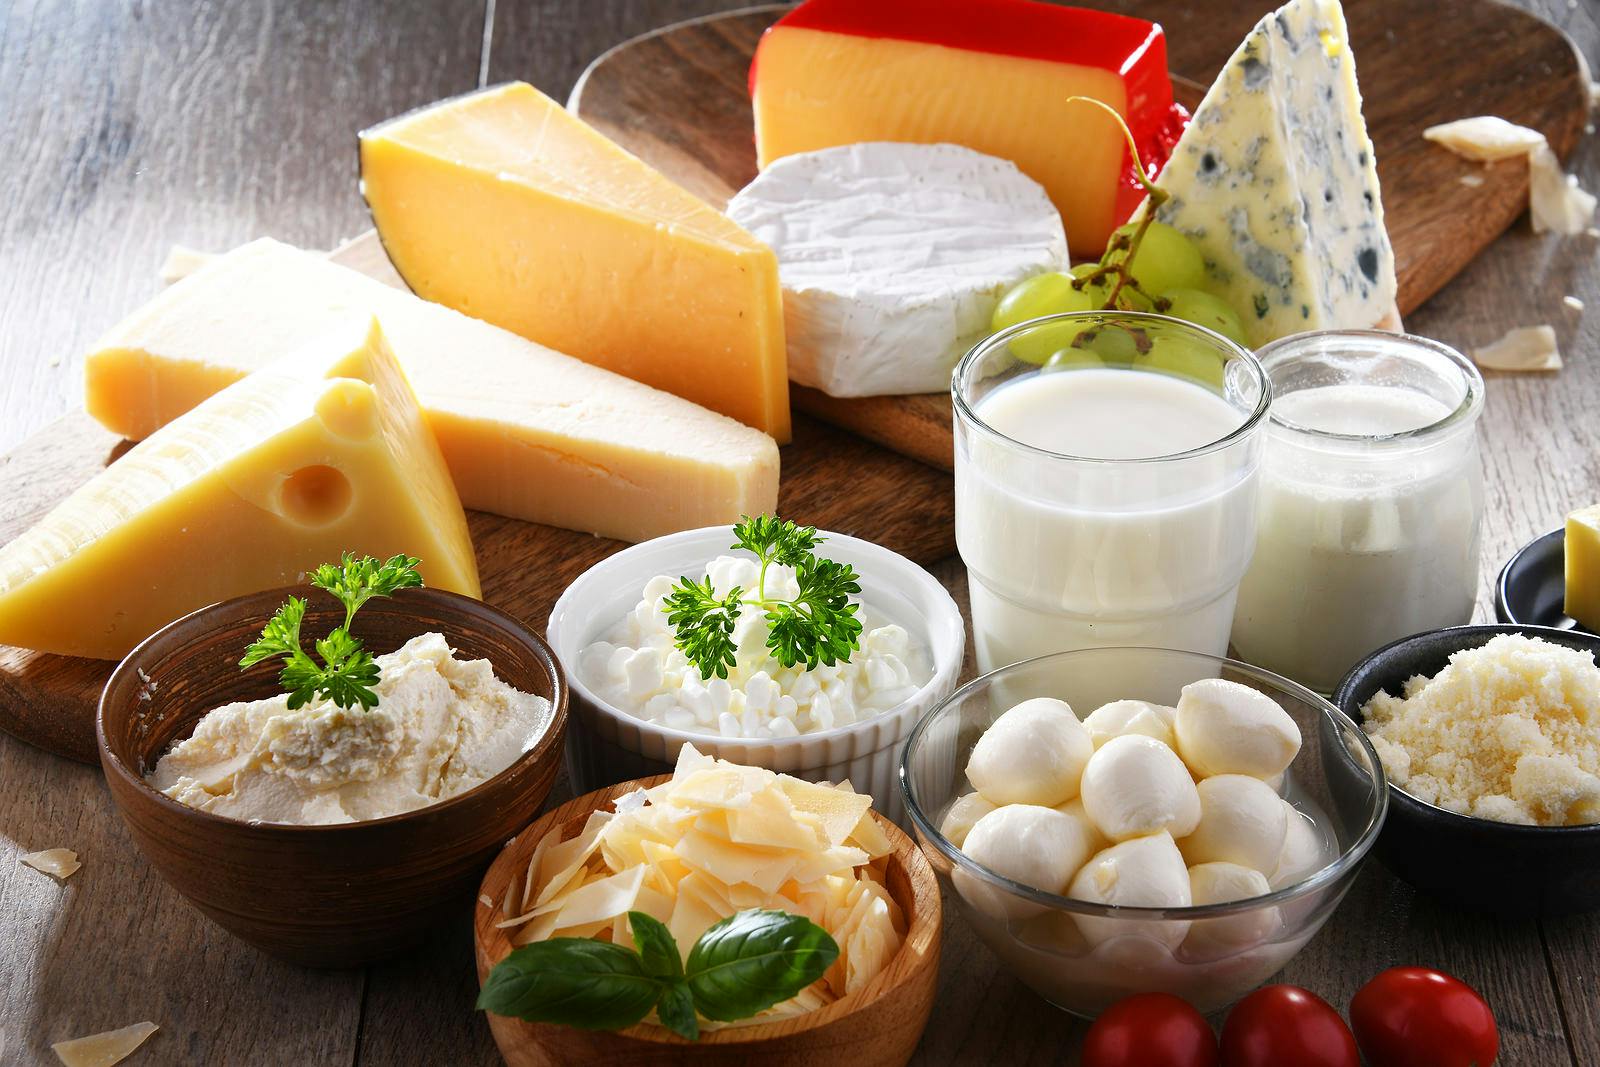 A variety of dairy products including cheese, milk and yogurt.
